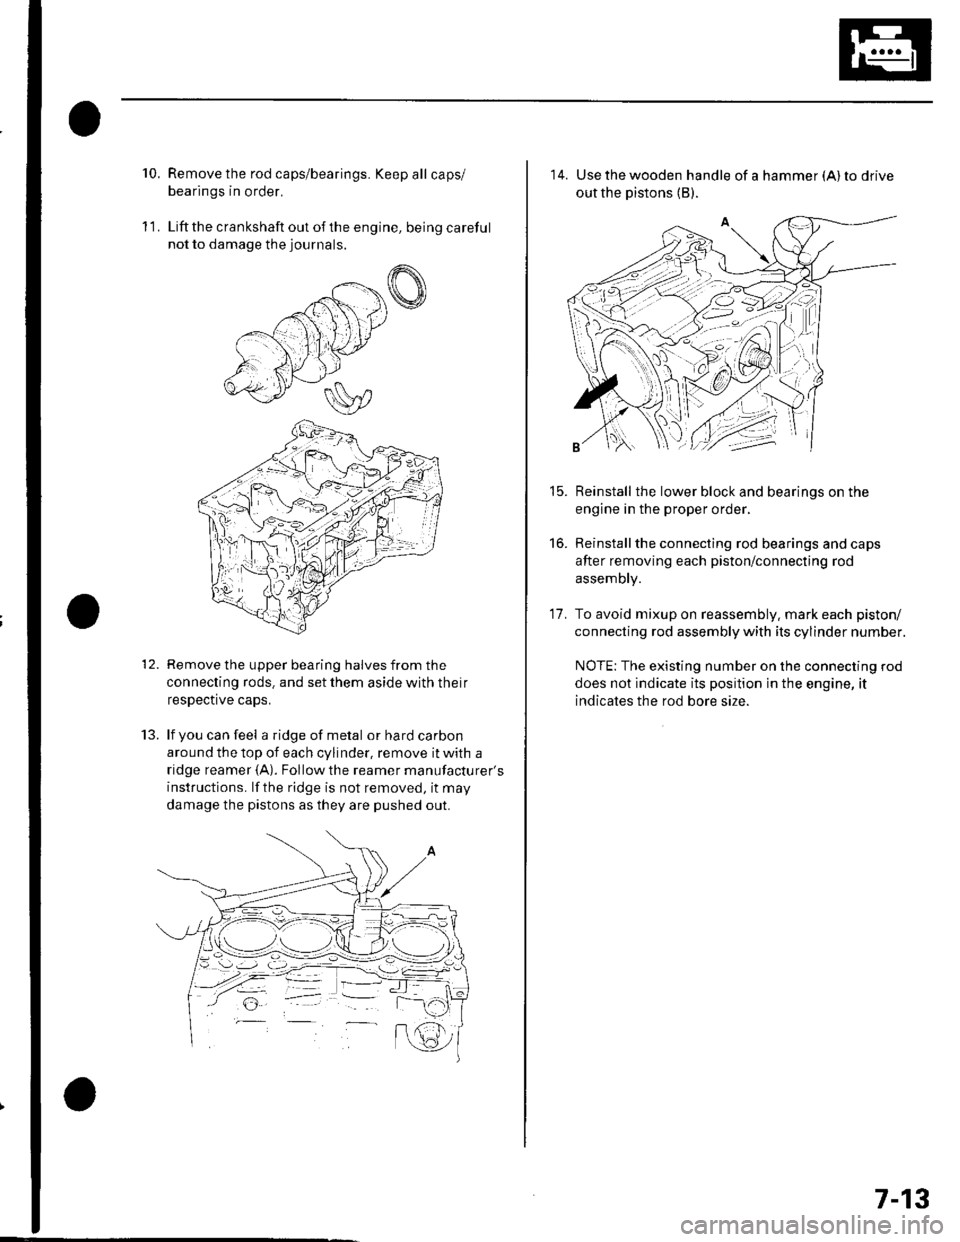 HONDA CIVIC 2003 7.G Workshop Manual 10.Remove the rod caps/bearings. Keep all caps/
bearings in order.
Liftthe crankshaft out ofthe engine, being careful
not to damage the journals.
Remove the upper bearing halves from the
connecting ro